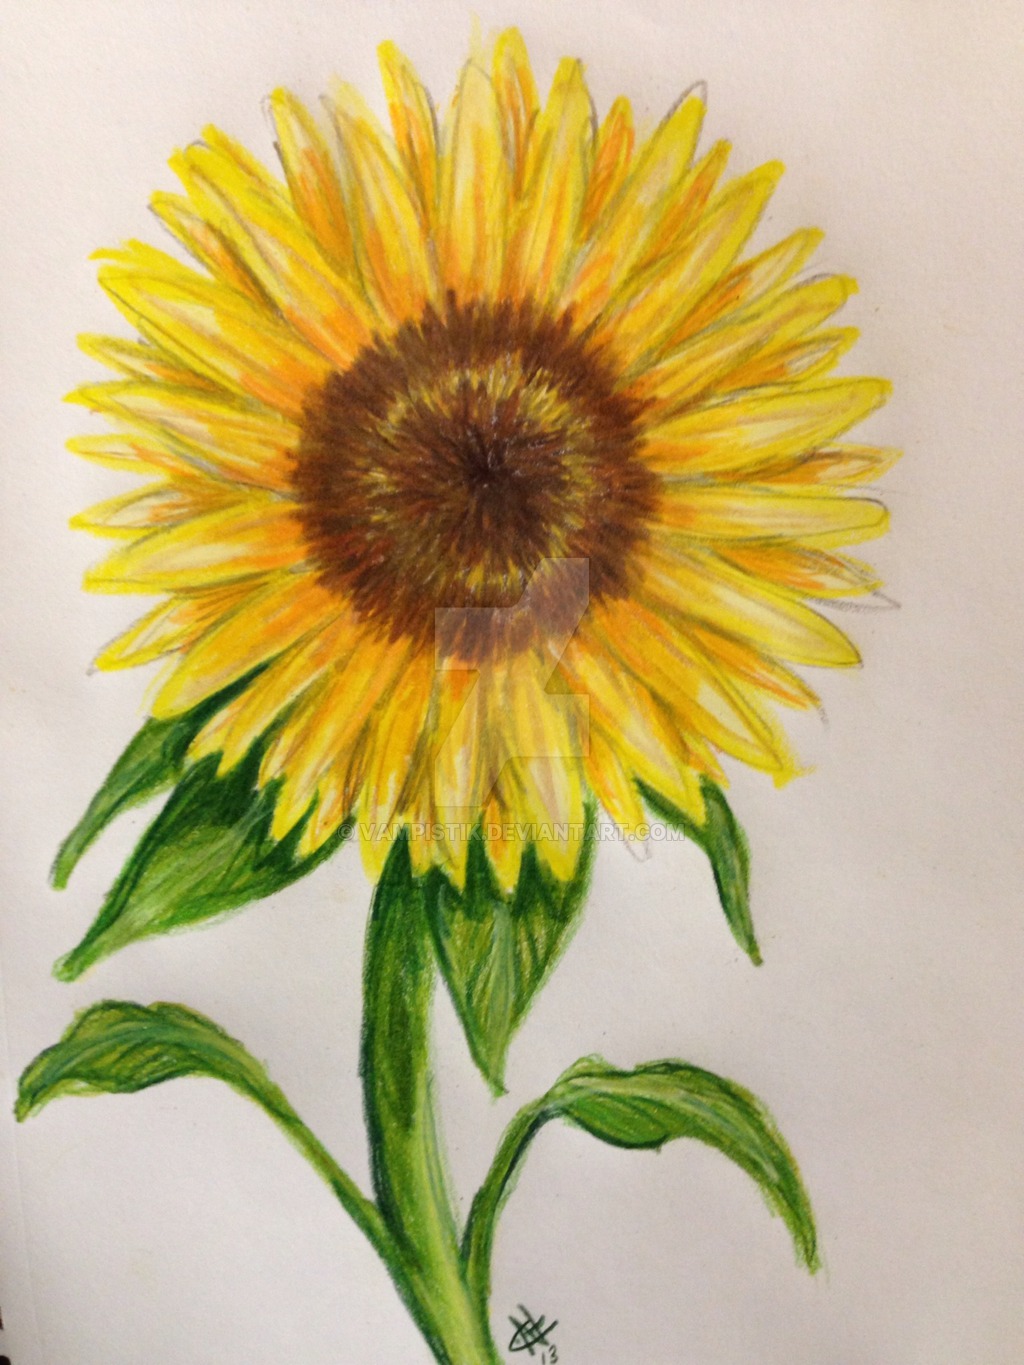 Sunflower Pencil Sketch at PaintingValley.com  Explore collection of Sunflower Pencil Sketch